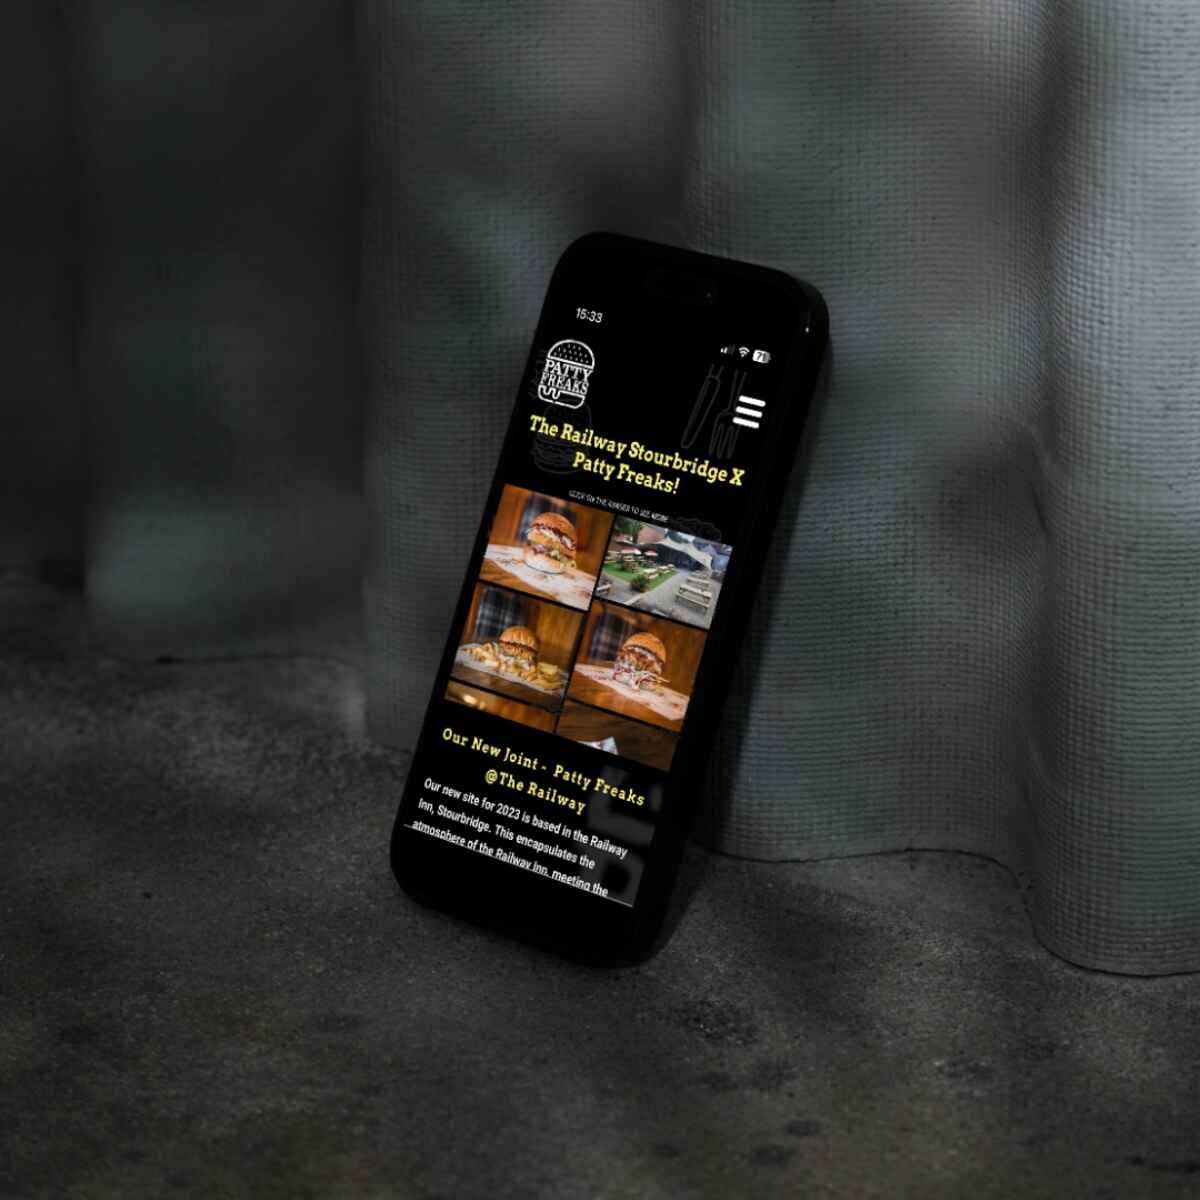 Mobile balanced upright displaying the Stourbridge Page for the Restaurant The Patty Freaks.